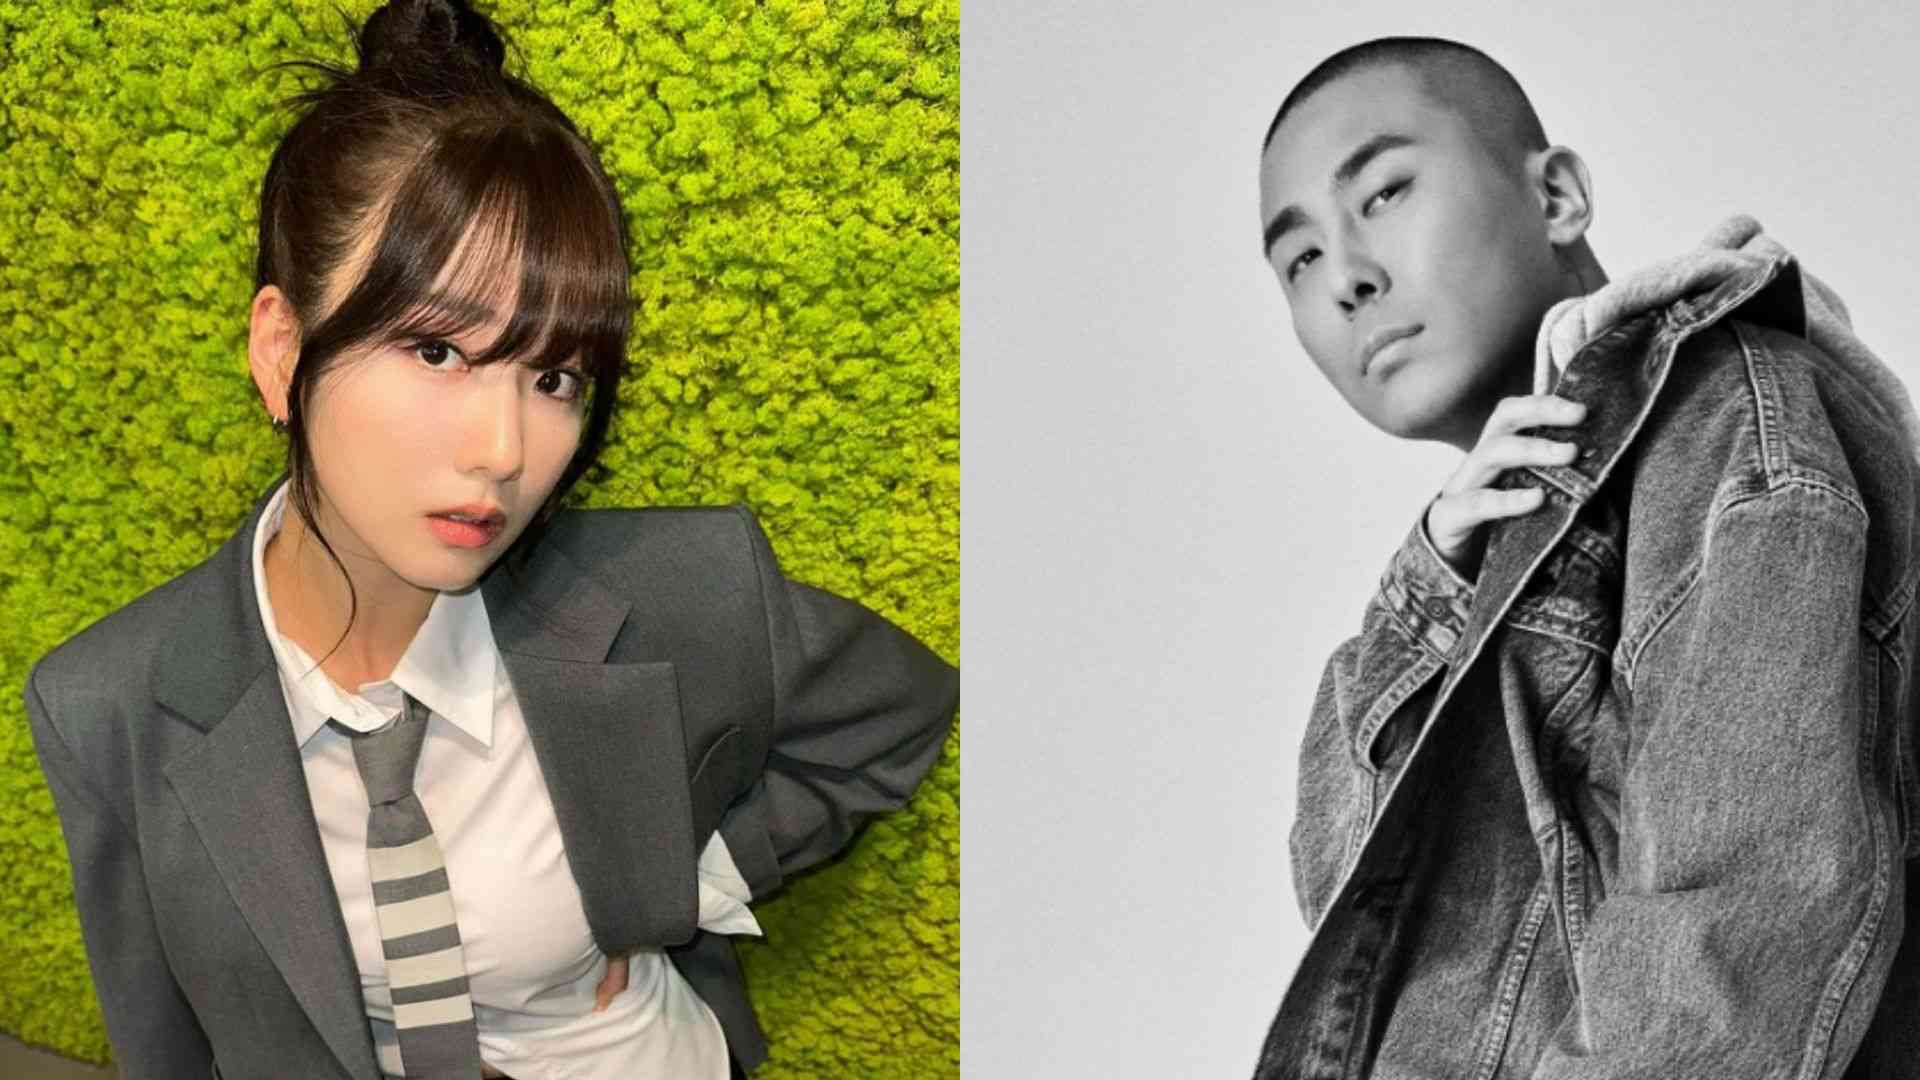 Apink's Yoon Bomi, Black Eyed Pilseung’s Rado confirmed to be dating